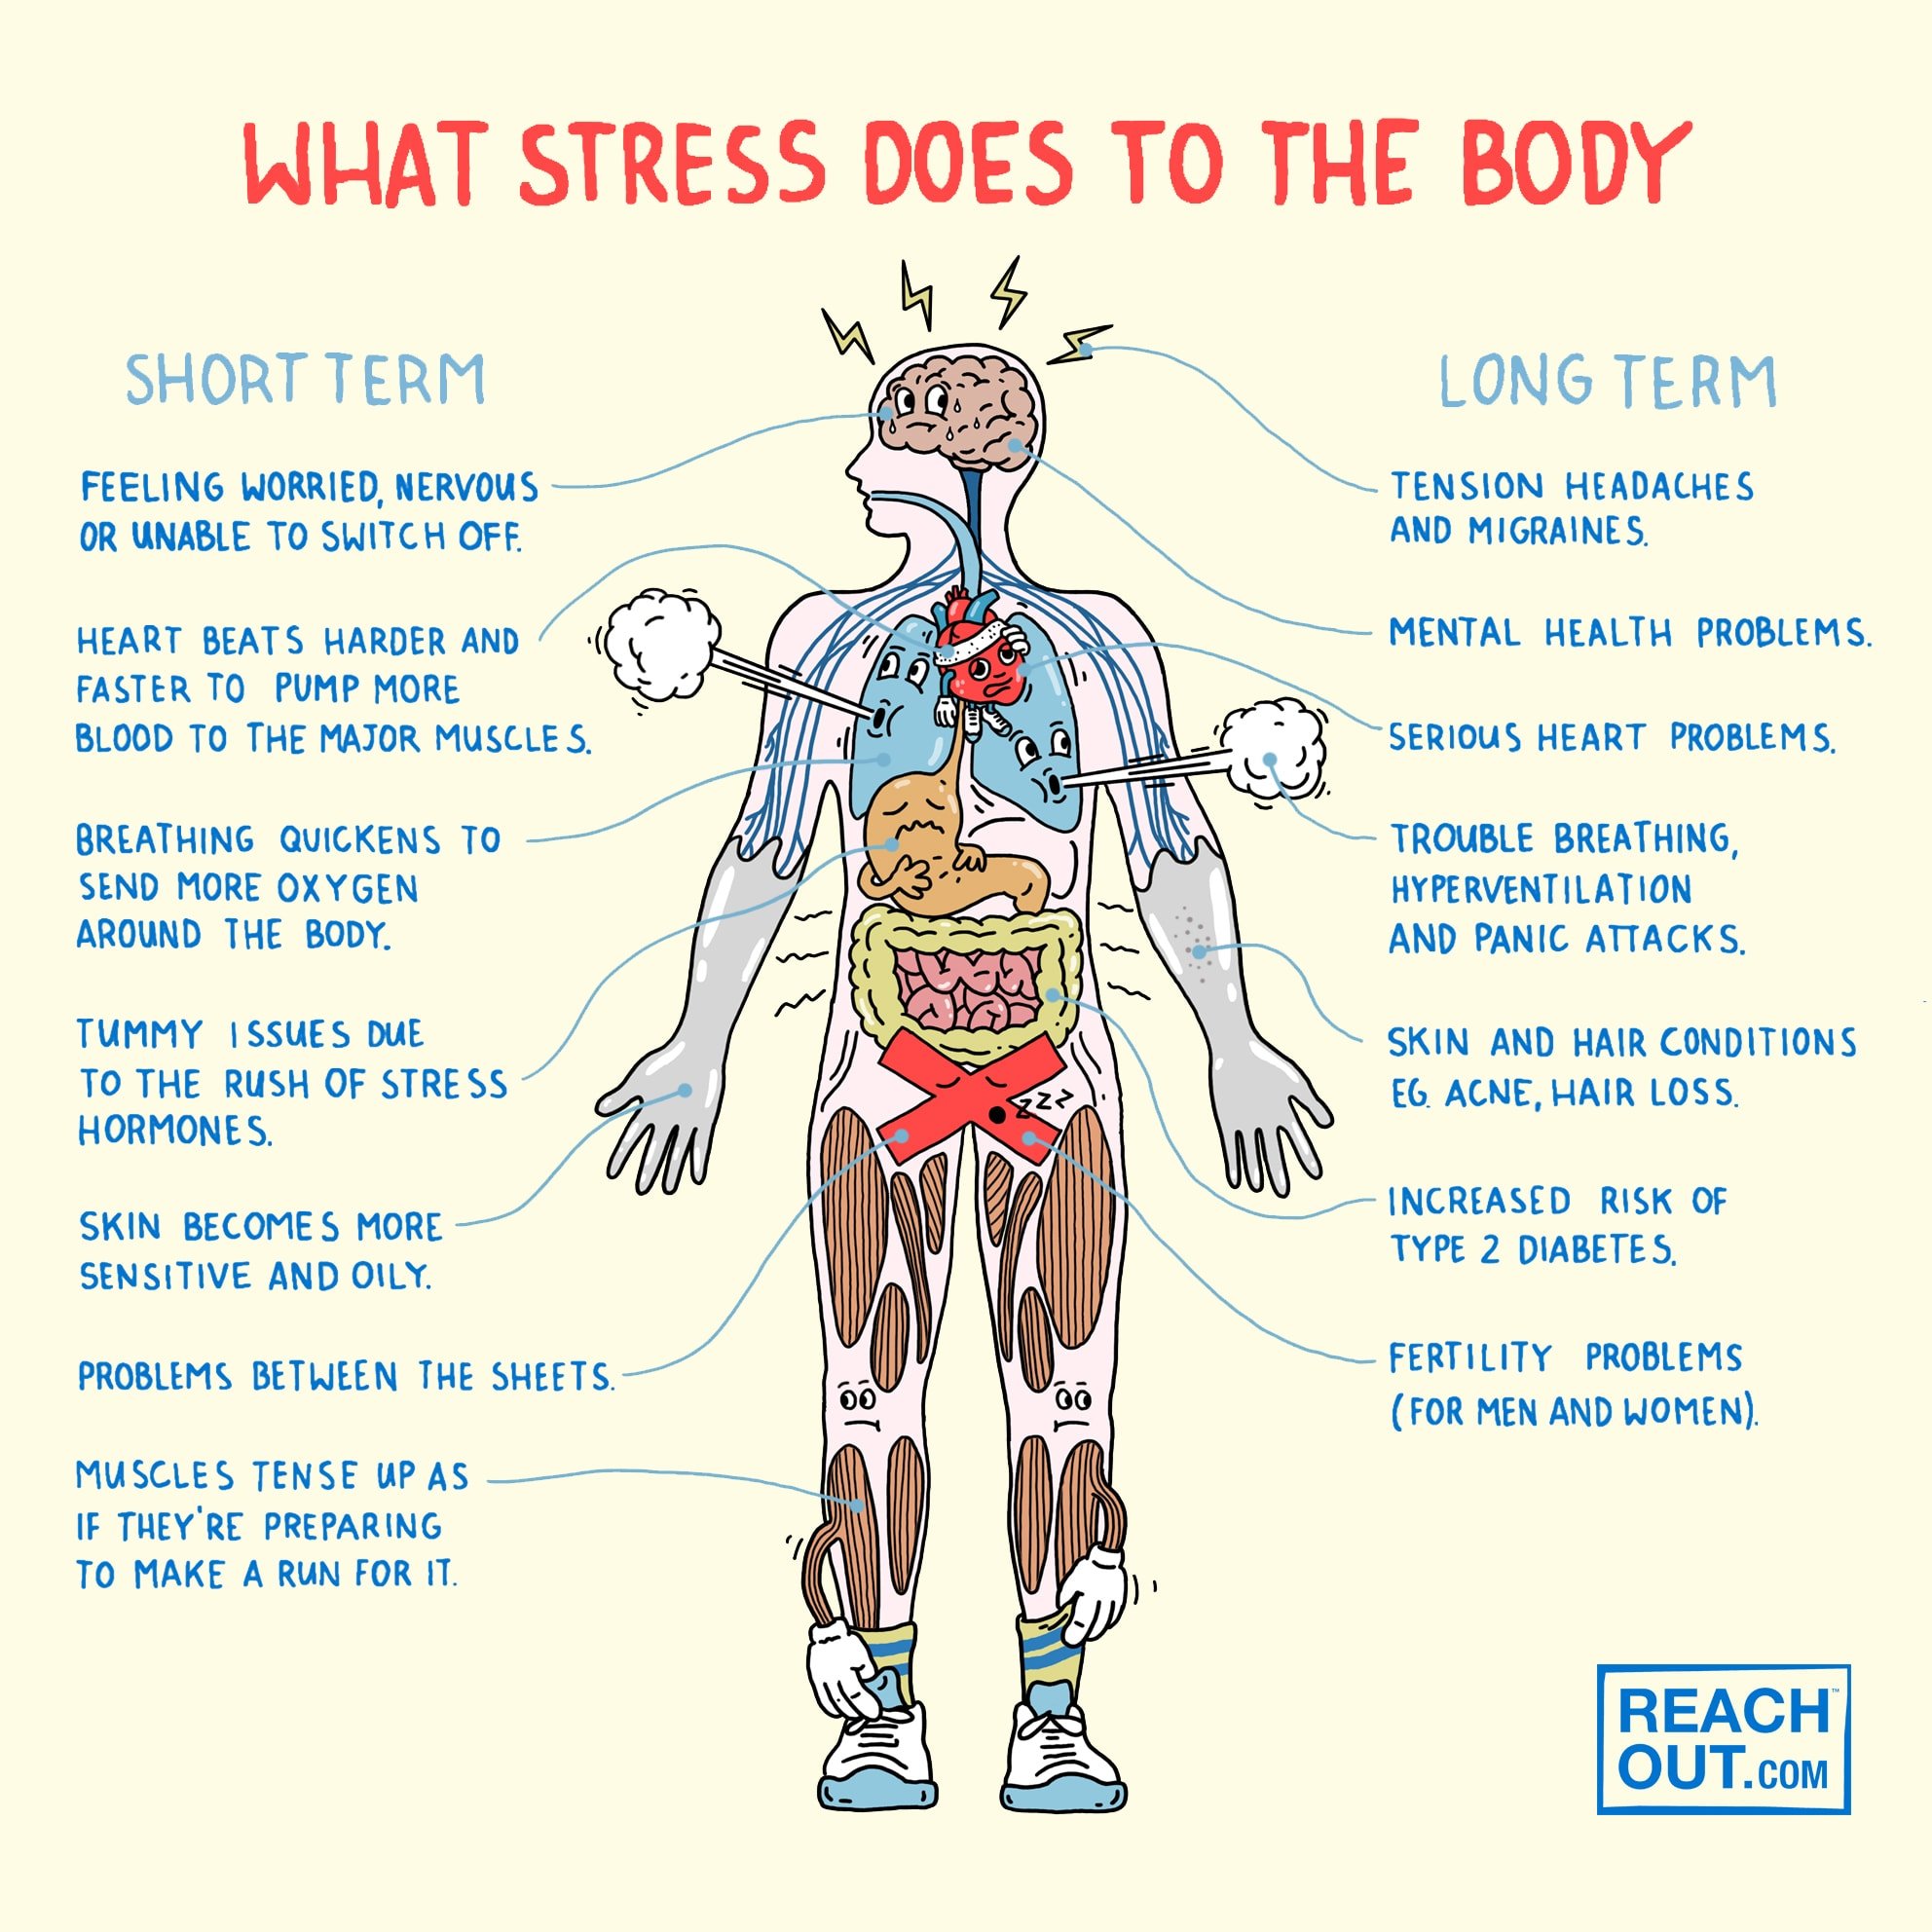 Effects of stress on the body